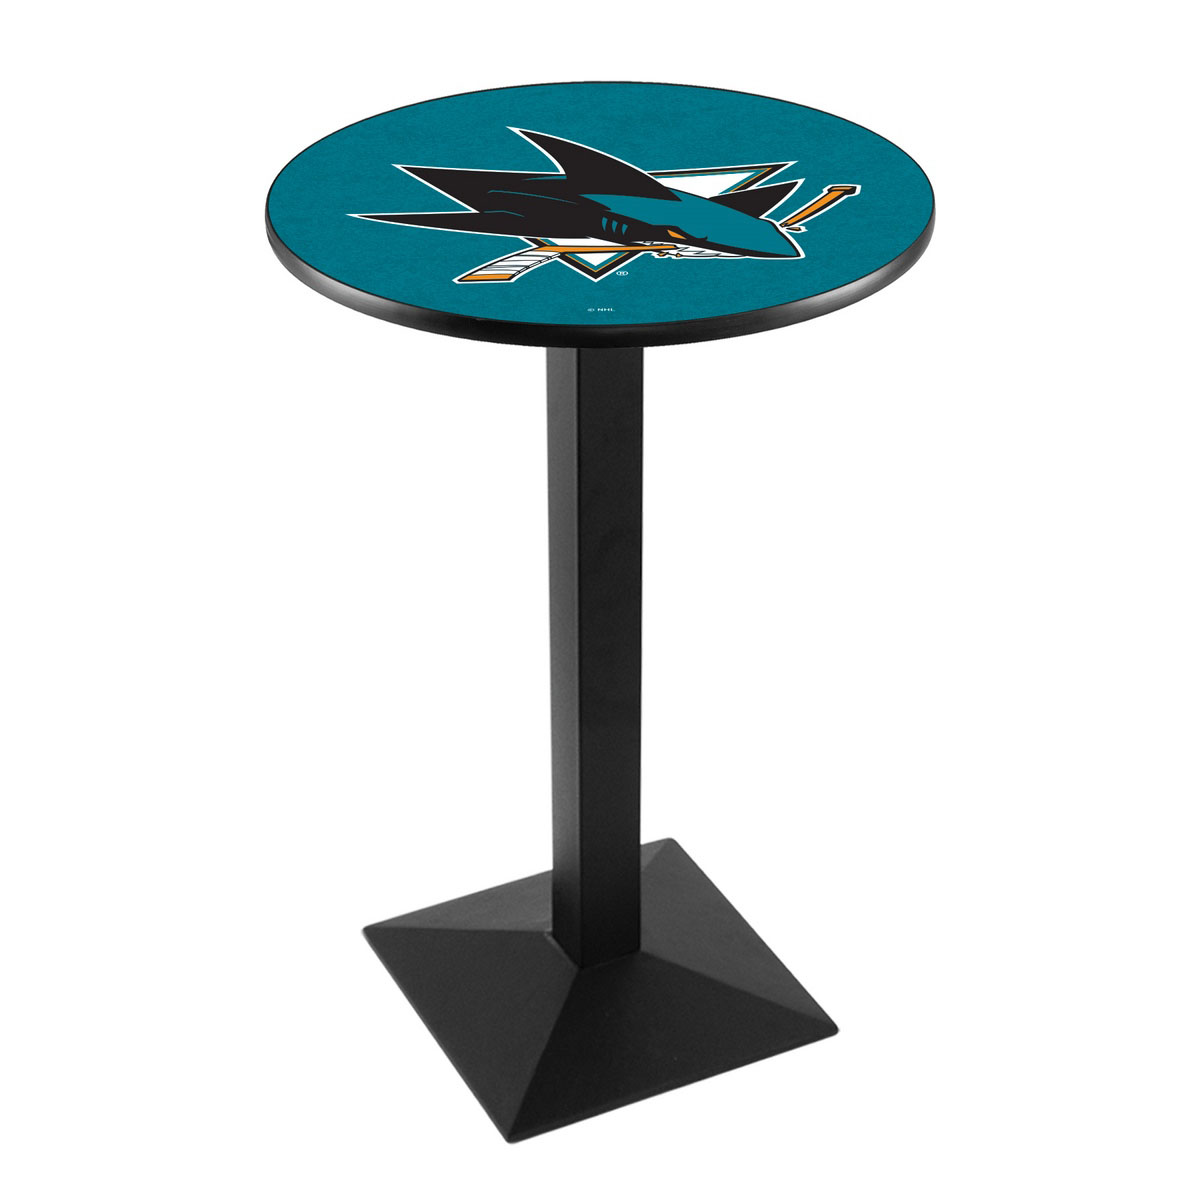 San Jose Sharks Logo Pub Bar Table With Square Stand